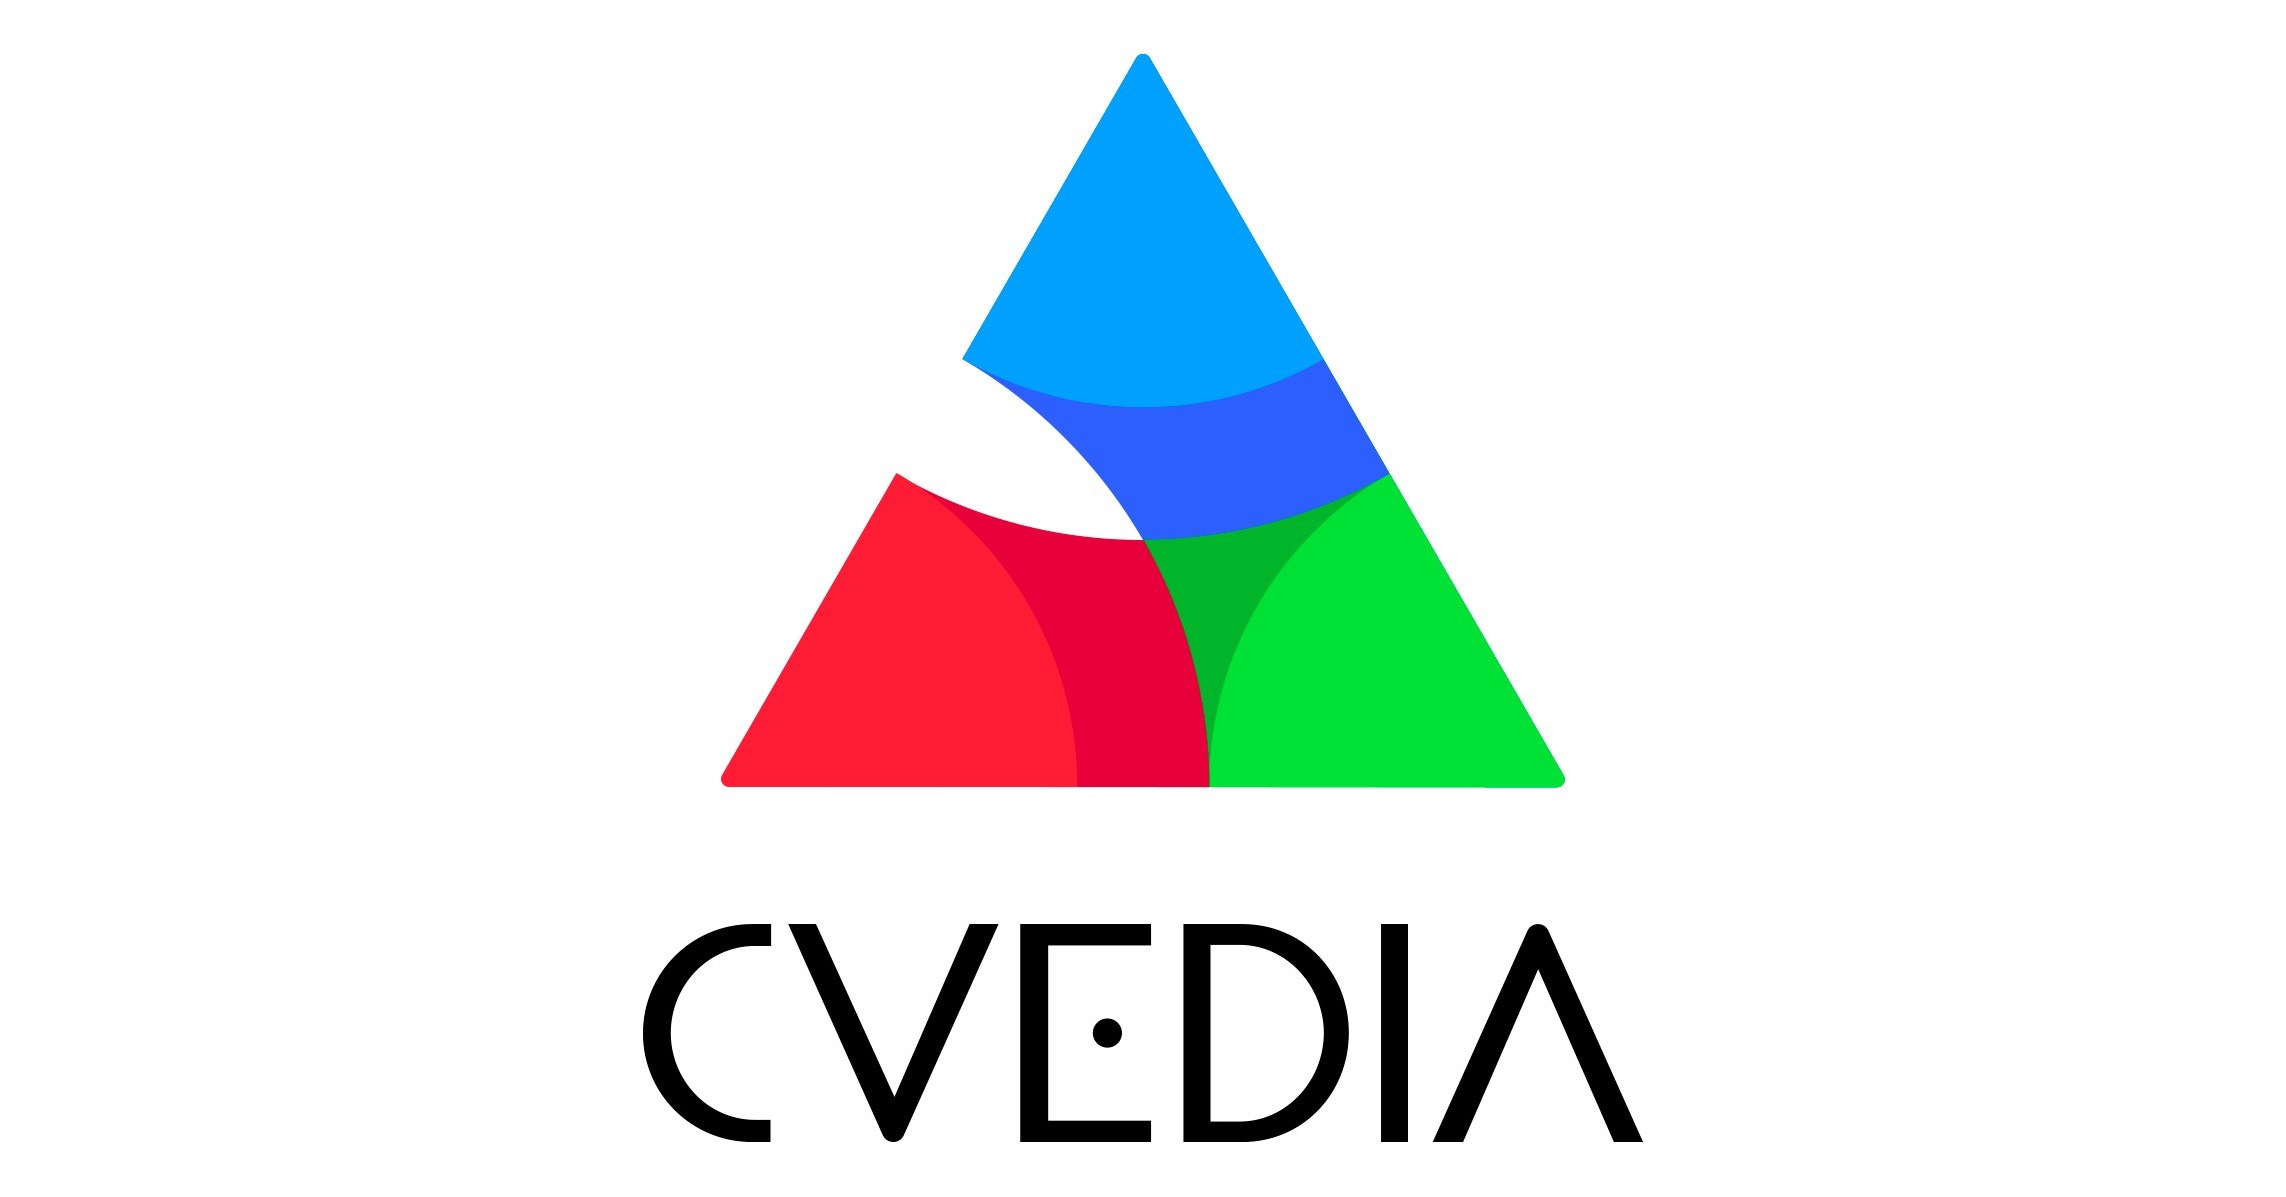 CVEDIA Becomes First Synthetic Data Company to Solve 'Domain Gap' Problem, Deploying AI Without Data